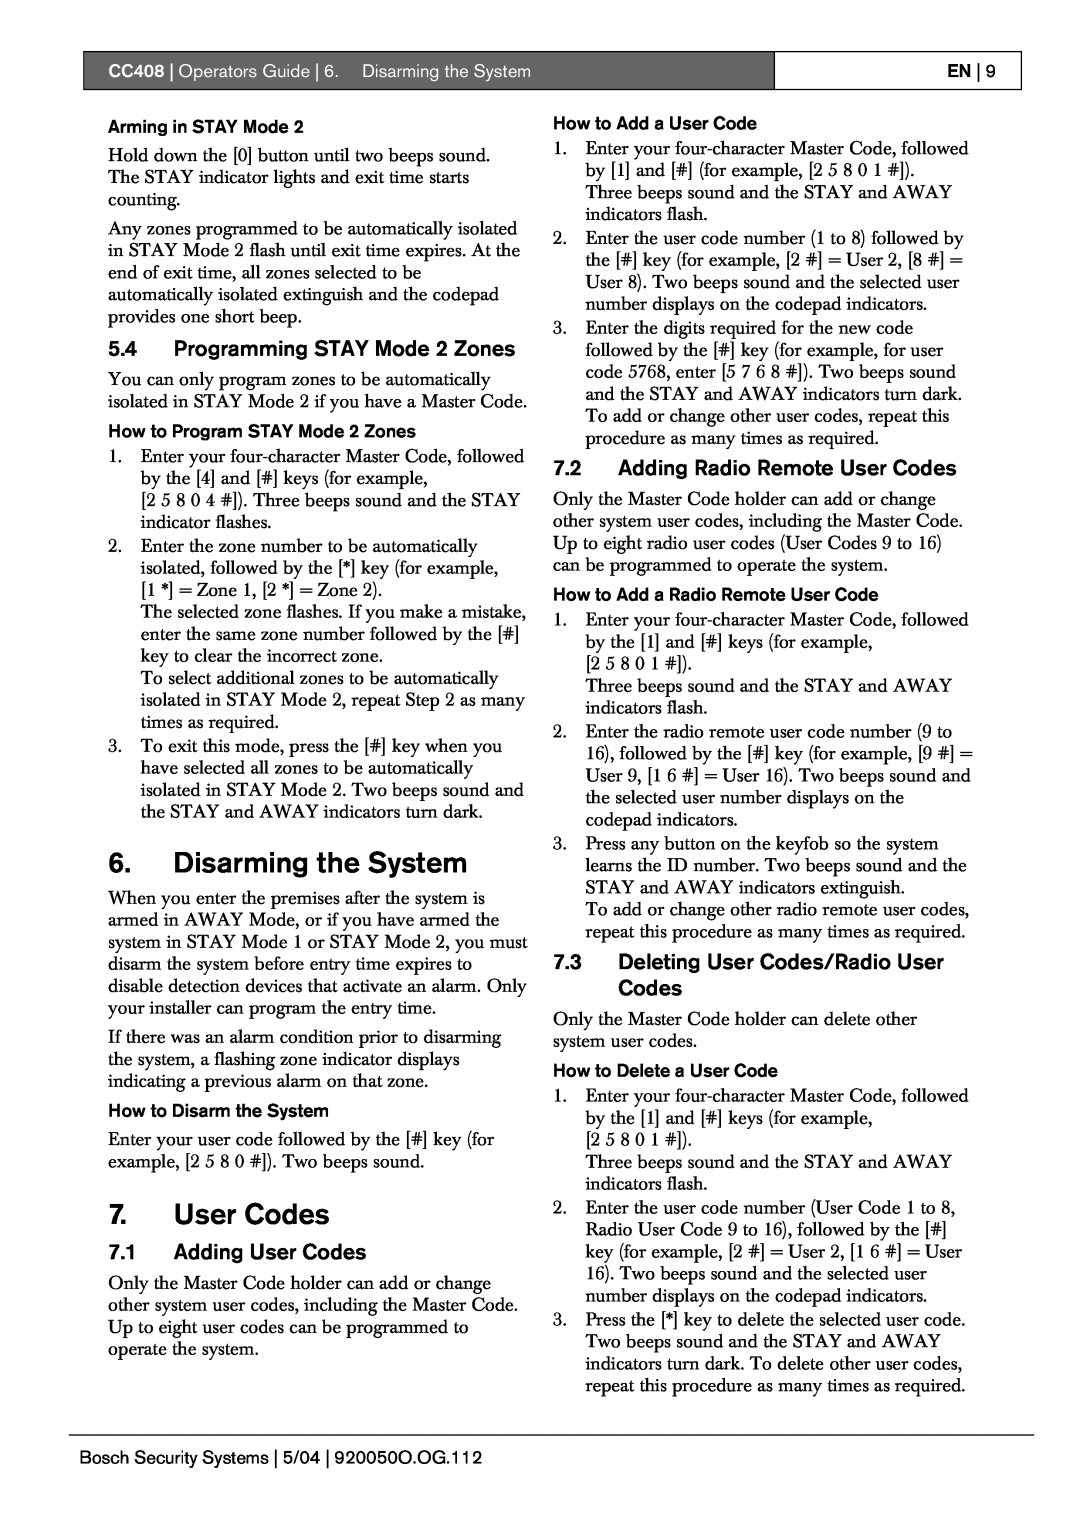 Bosch Appliances CC408 manual Disarming the System, 5.4Programming STAY Mode 2 Zones, 7.1Adding User Codes 